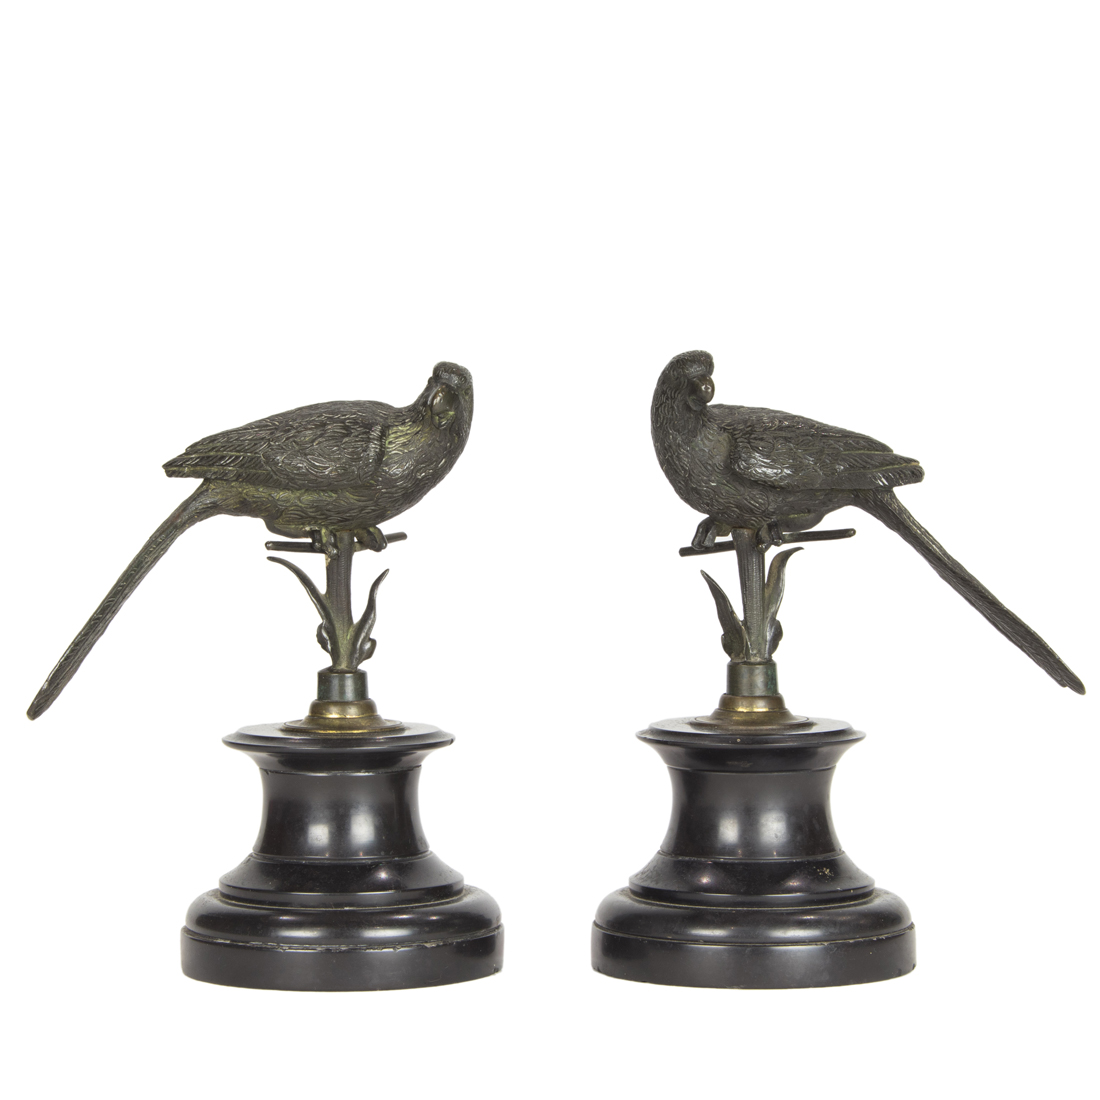 A PAIR OF BRONZE FIGURES OF FALCONS 3cdda7